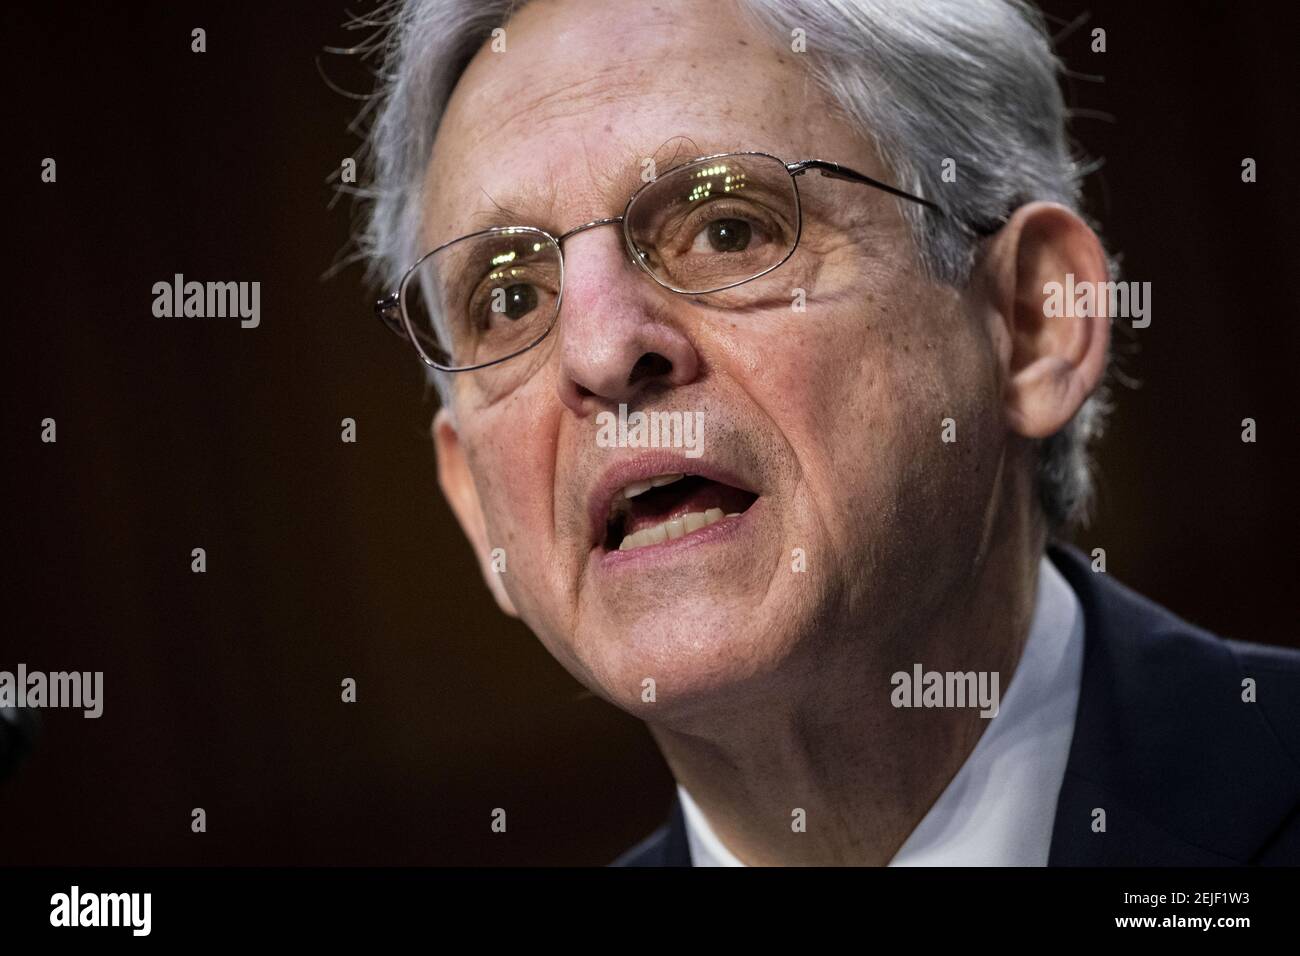 Washington, United States. 22nd Feb, 2021. Attorney General nominee Merrick Garland speaks during his confirmation hearing on Capitol Hill in Washington, DC on February 22, 2021. Garland previously served at the Chief Judge for the U.S. Court of Appeals for the District of Columbia Circuit. Pool Photo by Al Drago/UPI Credit: UPI/Alamy Live News Stock Photo